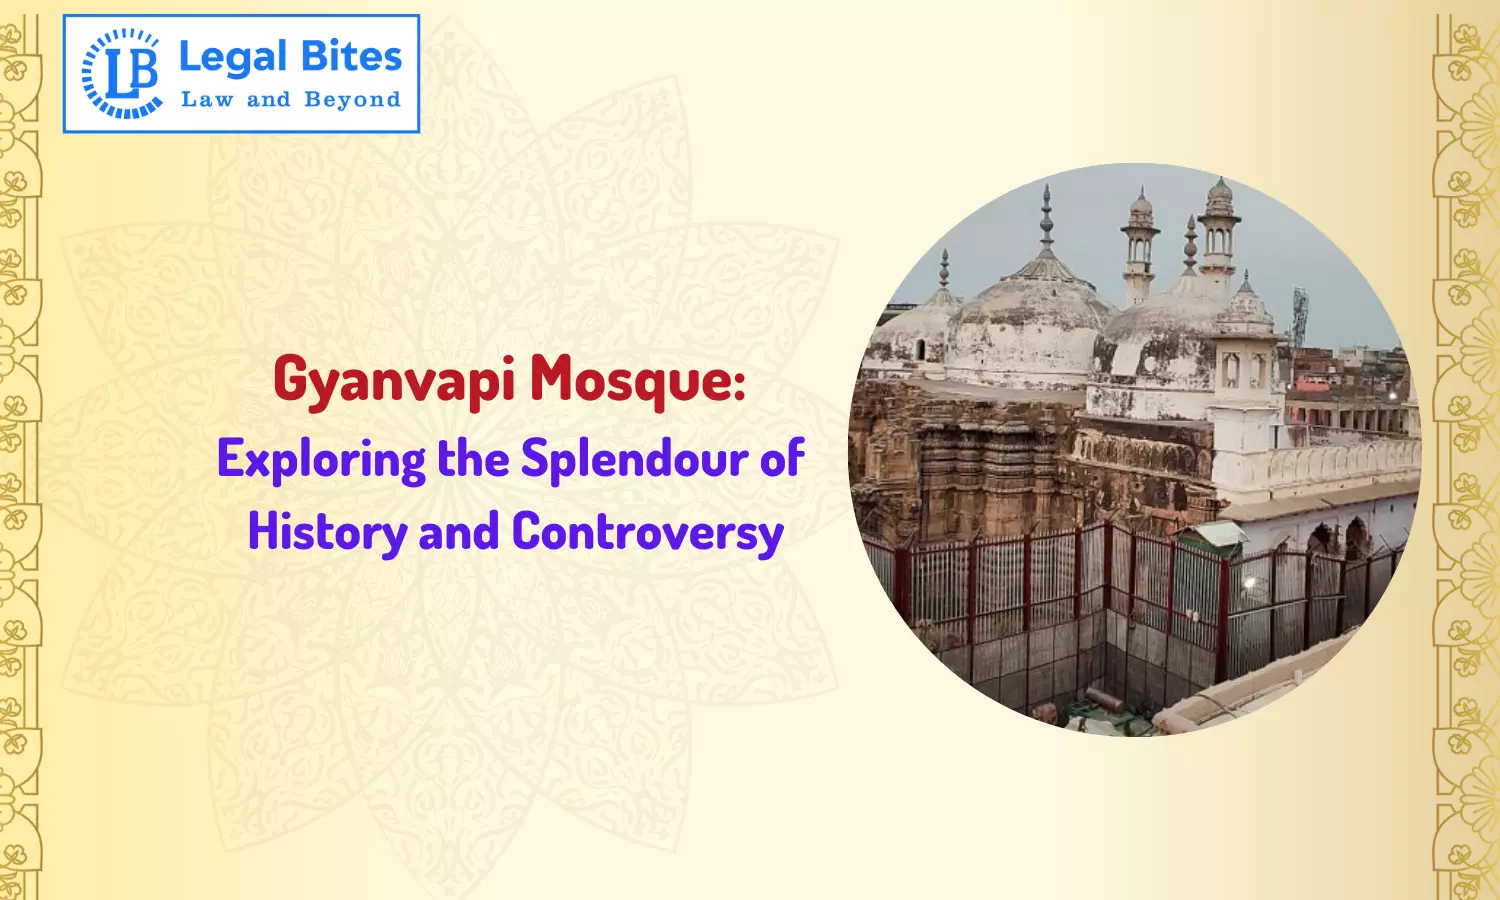 Gyanvapi Mosque: Exploring the Splendour of History and Controversy